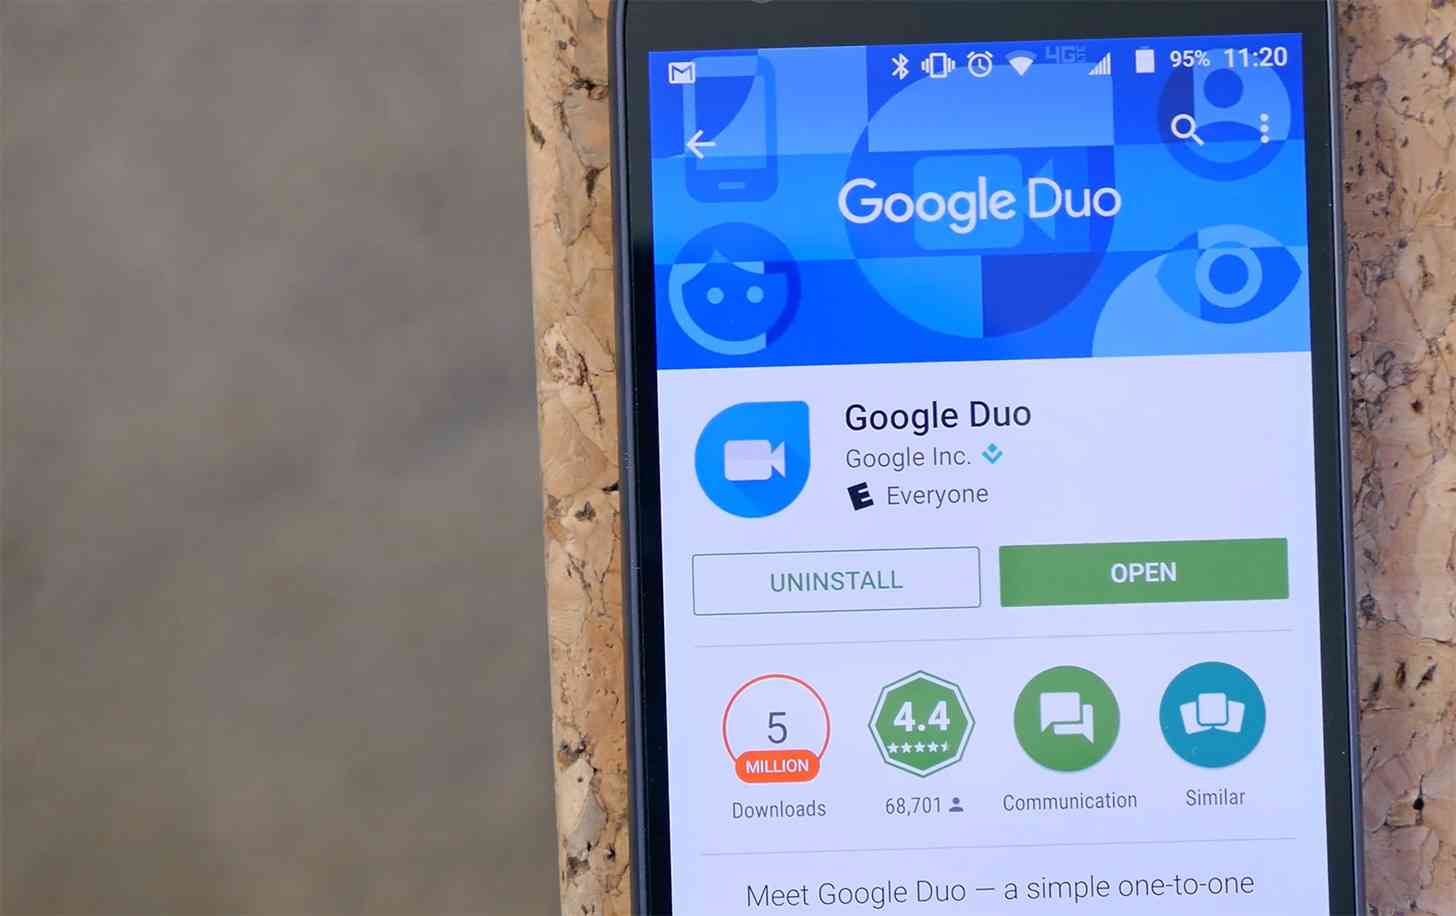 Google Duo Play Store Android app